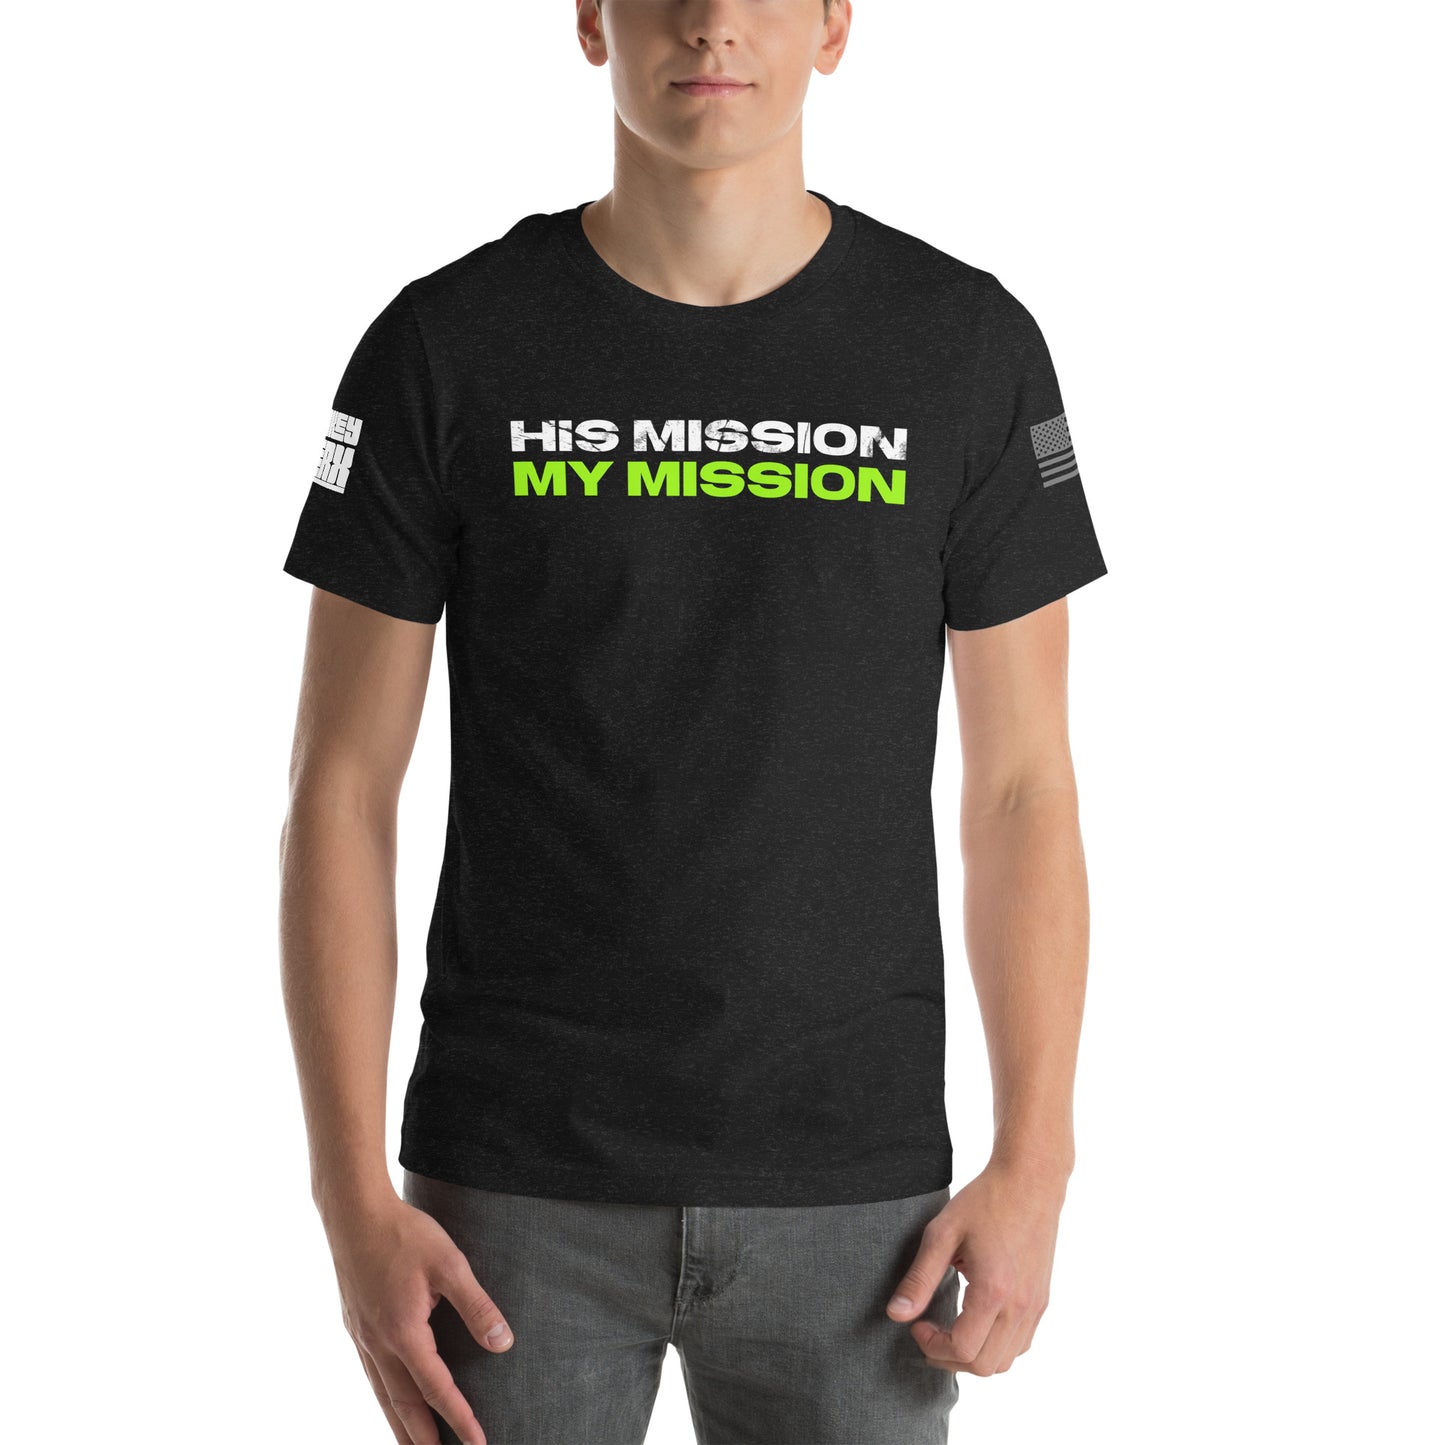 His Mission My Mission t-shirt